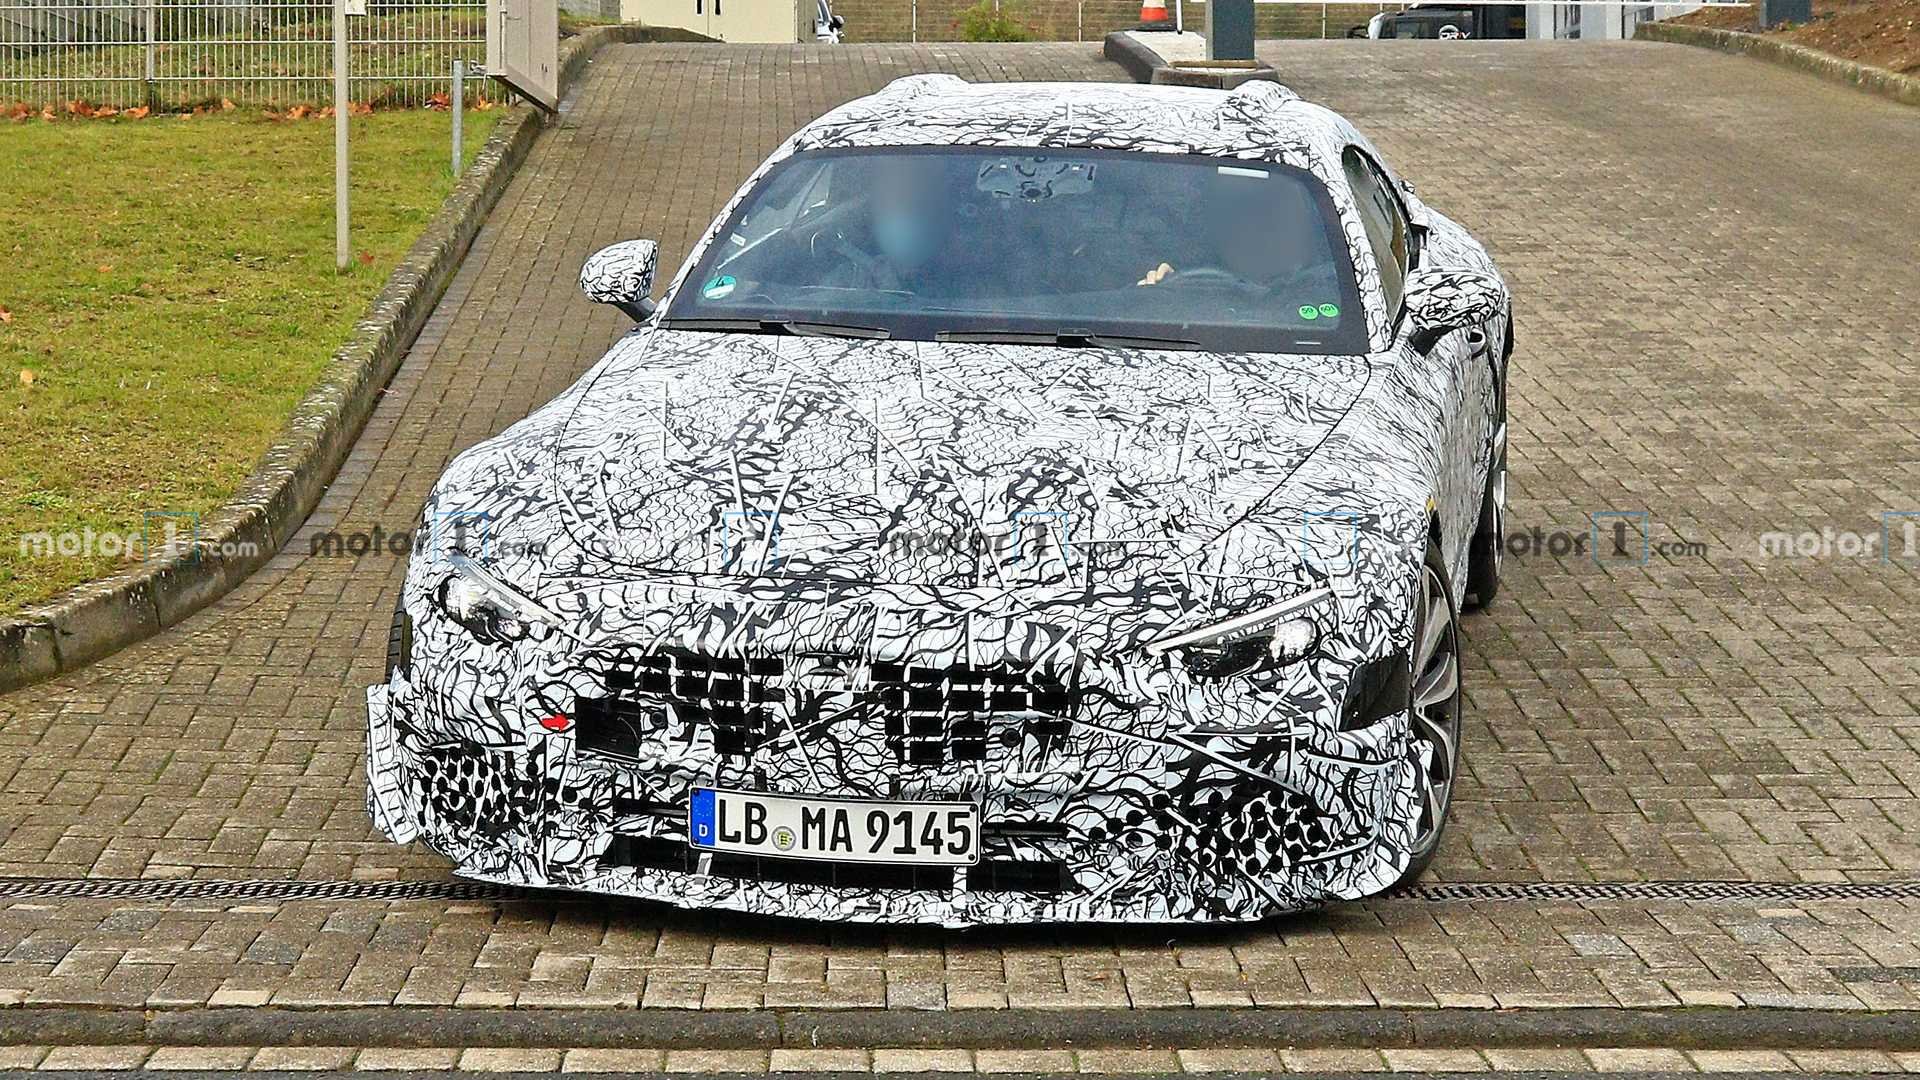 2022 Mercedes SL Spied Testing In Germany, Hear Its Engine